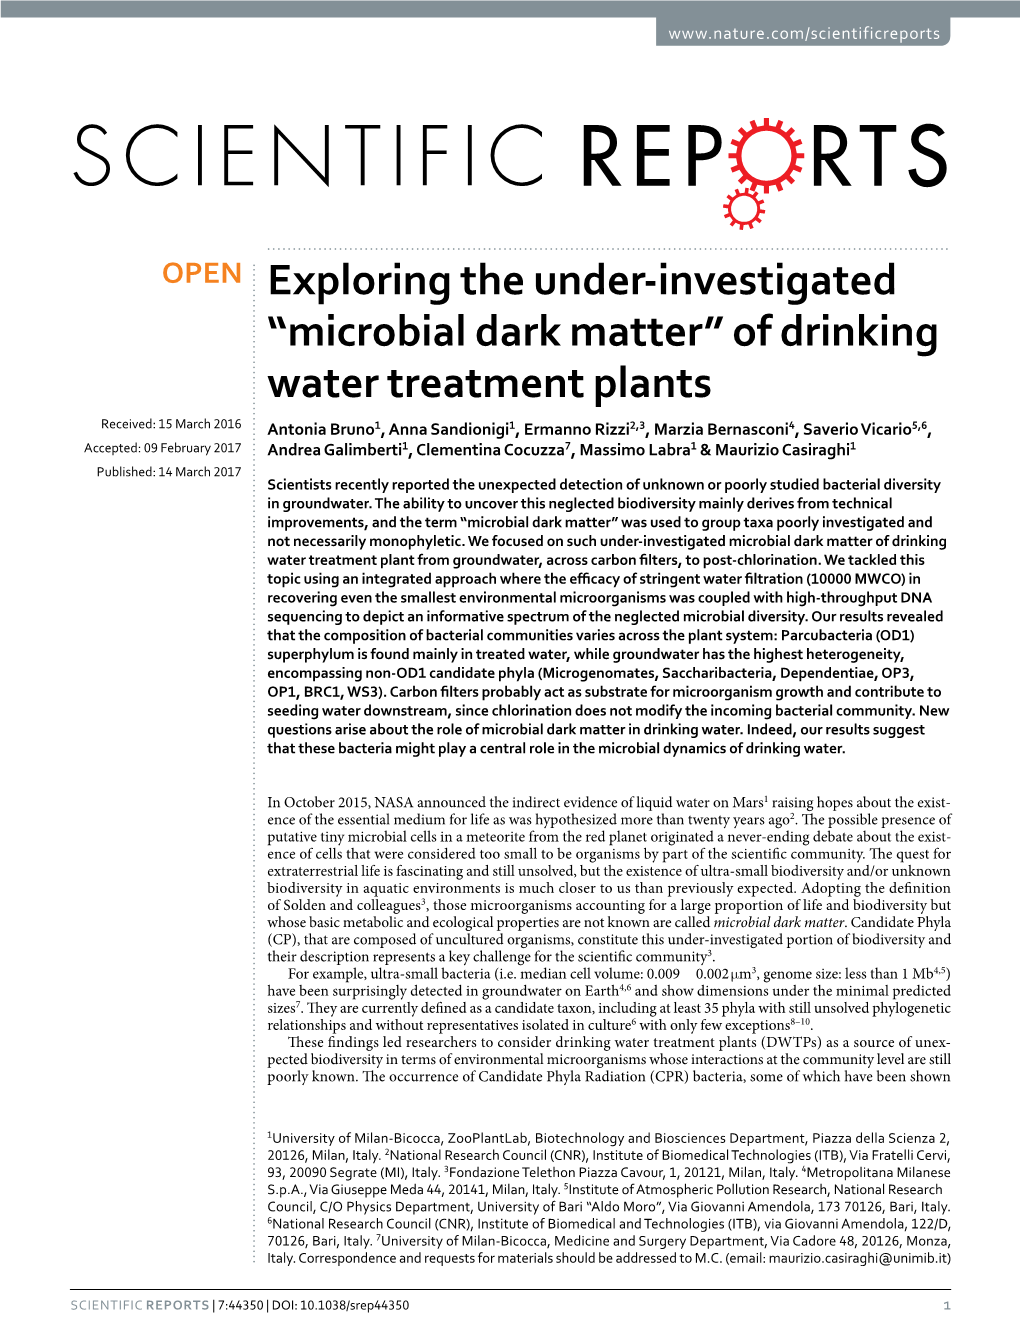 “Microbial Dark Matter” of Drinking Water Treatment Plants